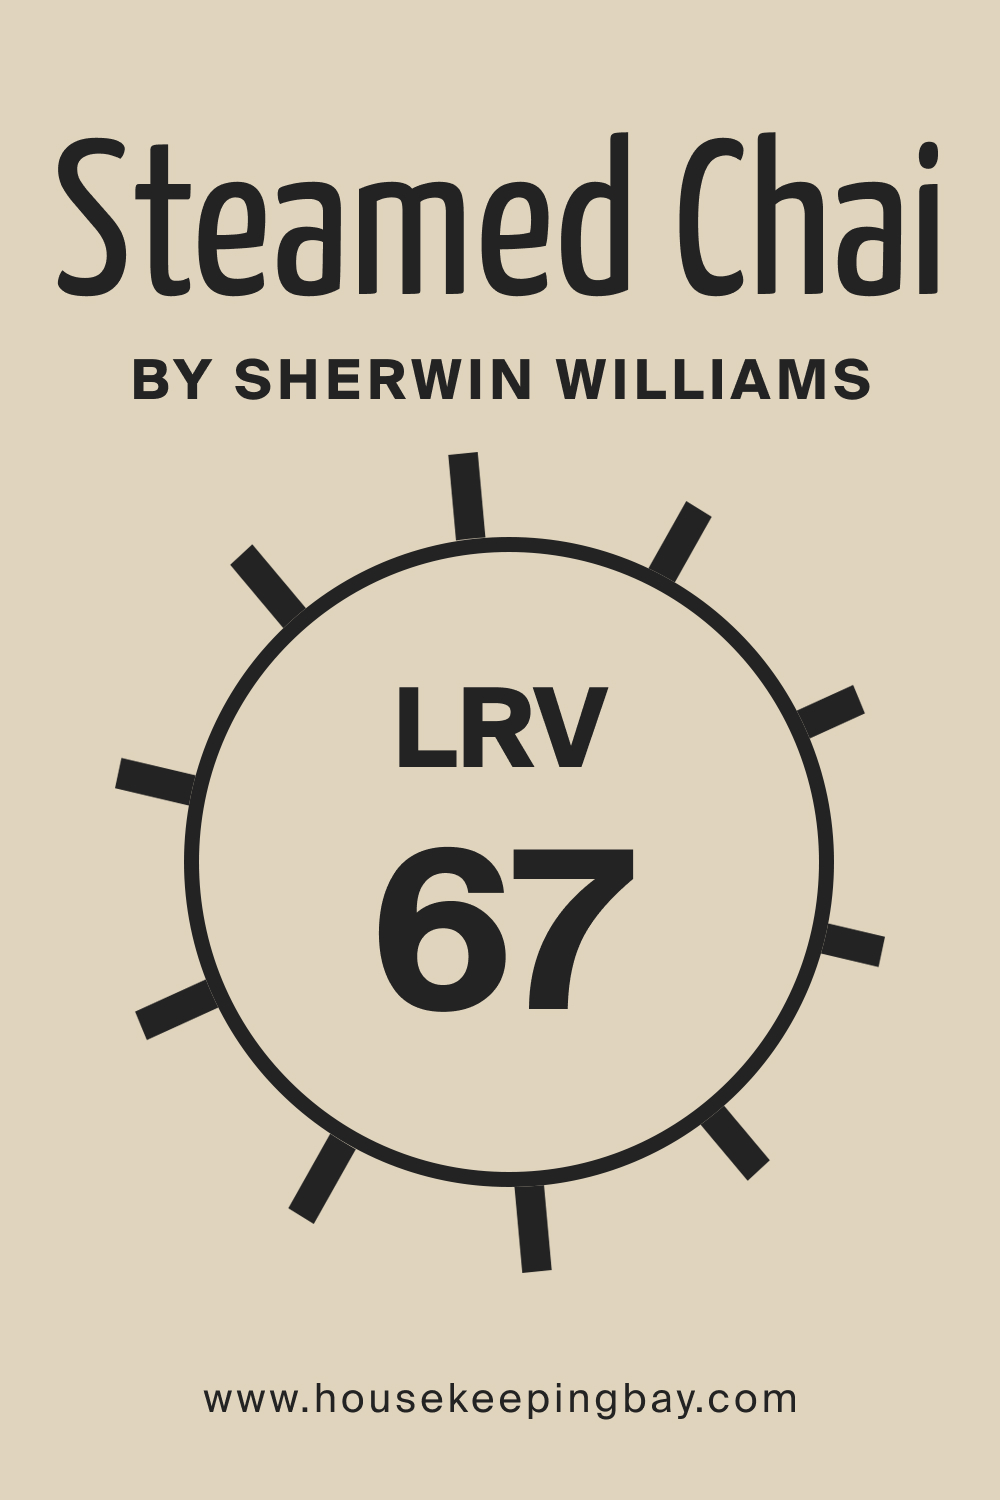 SW 9509 Steamed Chai by Sherwin Williams. LRV 67